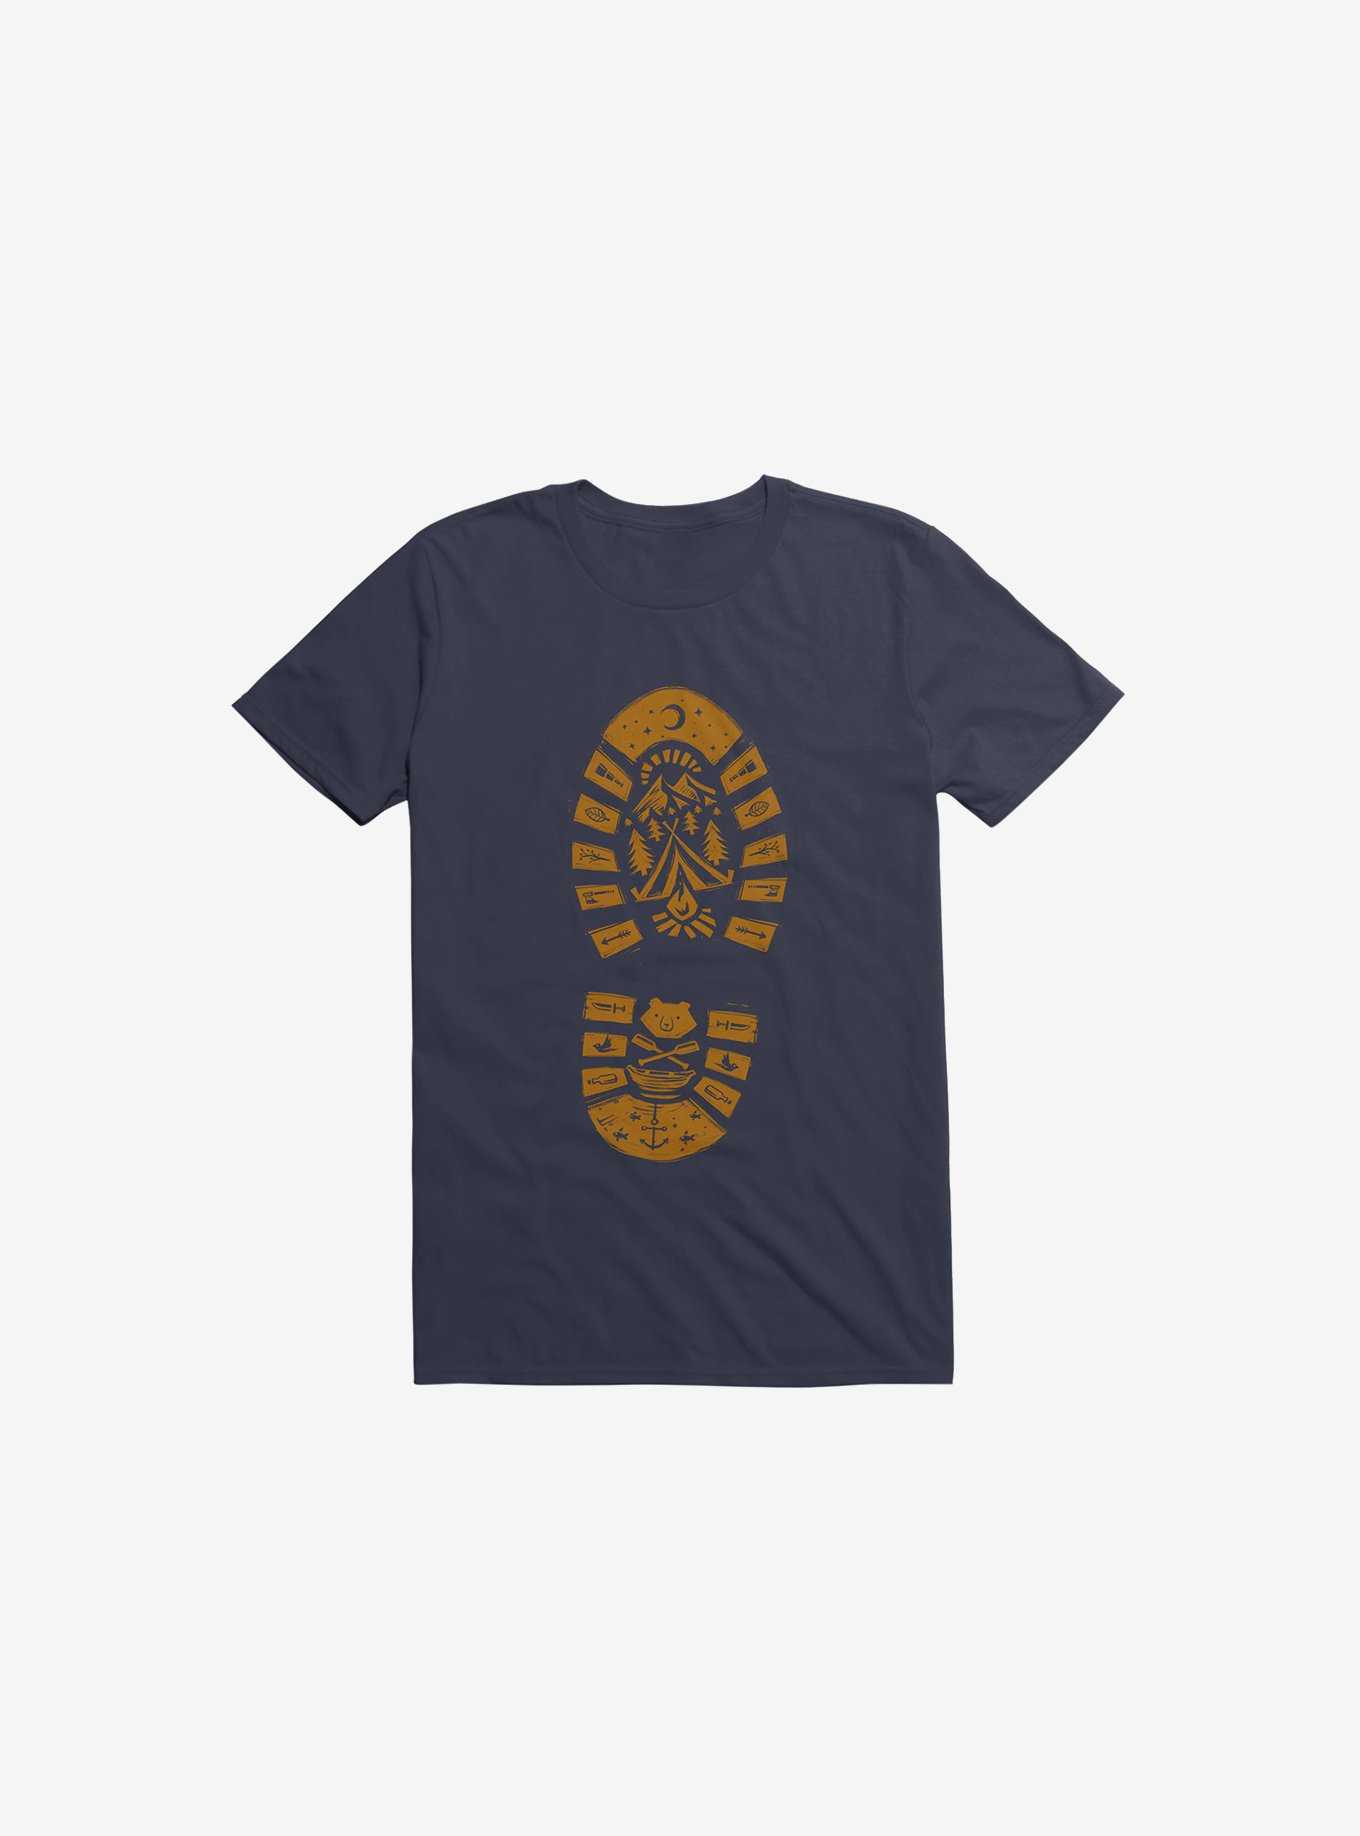 I Love Camping Boot Stamp Navy Blue T-Shirt, , hi-res